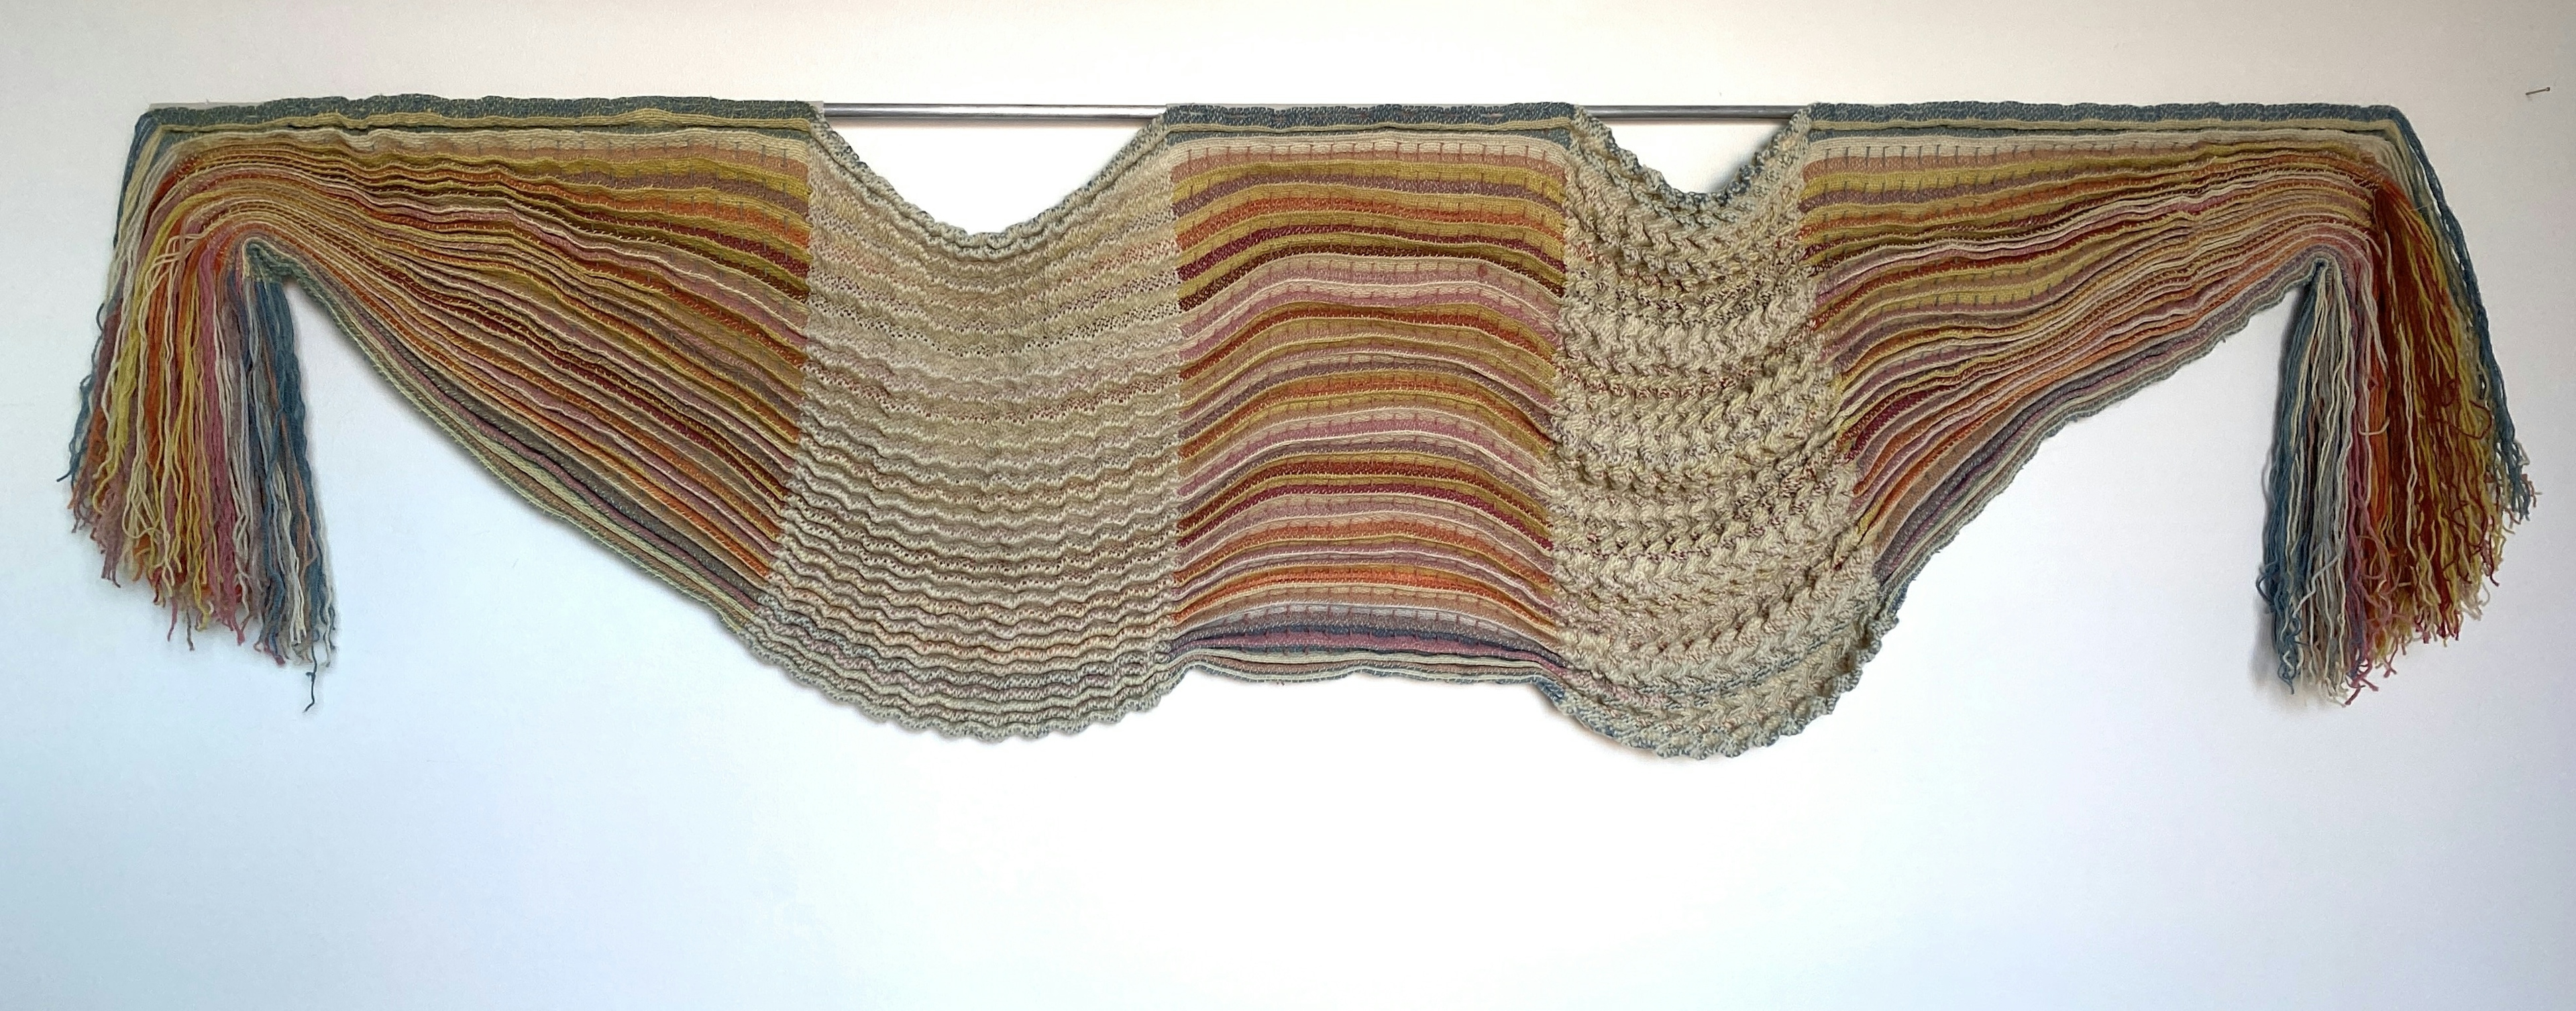 With time. 2021. Wool, natural dyes. Handwoven. 200 x 80 cm